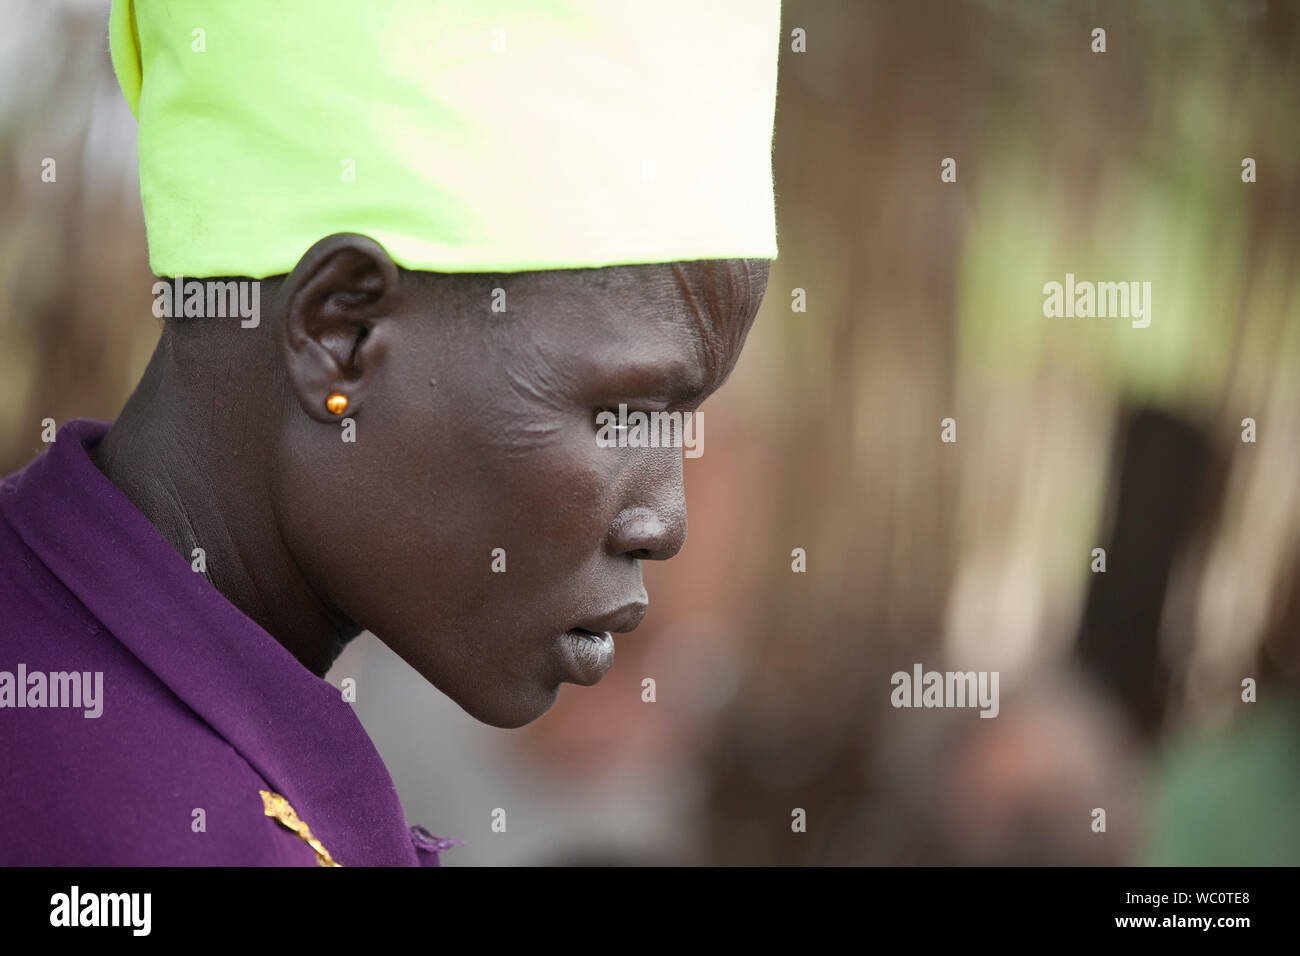 PANWELL, SOUTH SUDAN-NOVEMBER 2, 2013: An unidentified woman with facial scarification in the village of Panwell, South Sudan Stock Photo